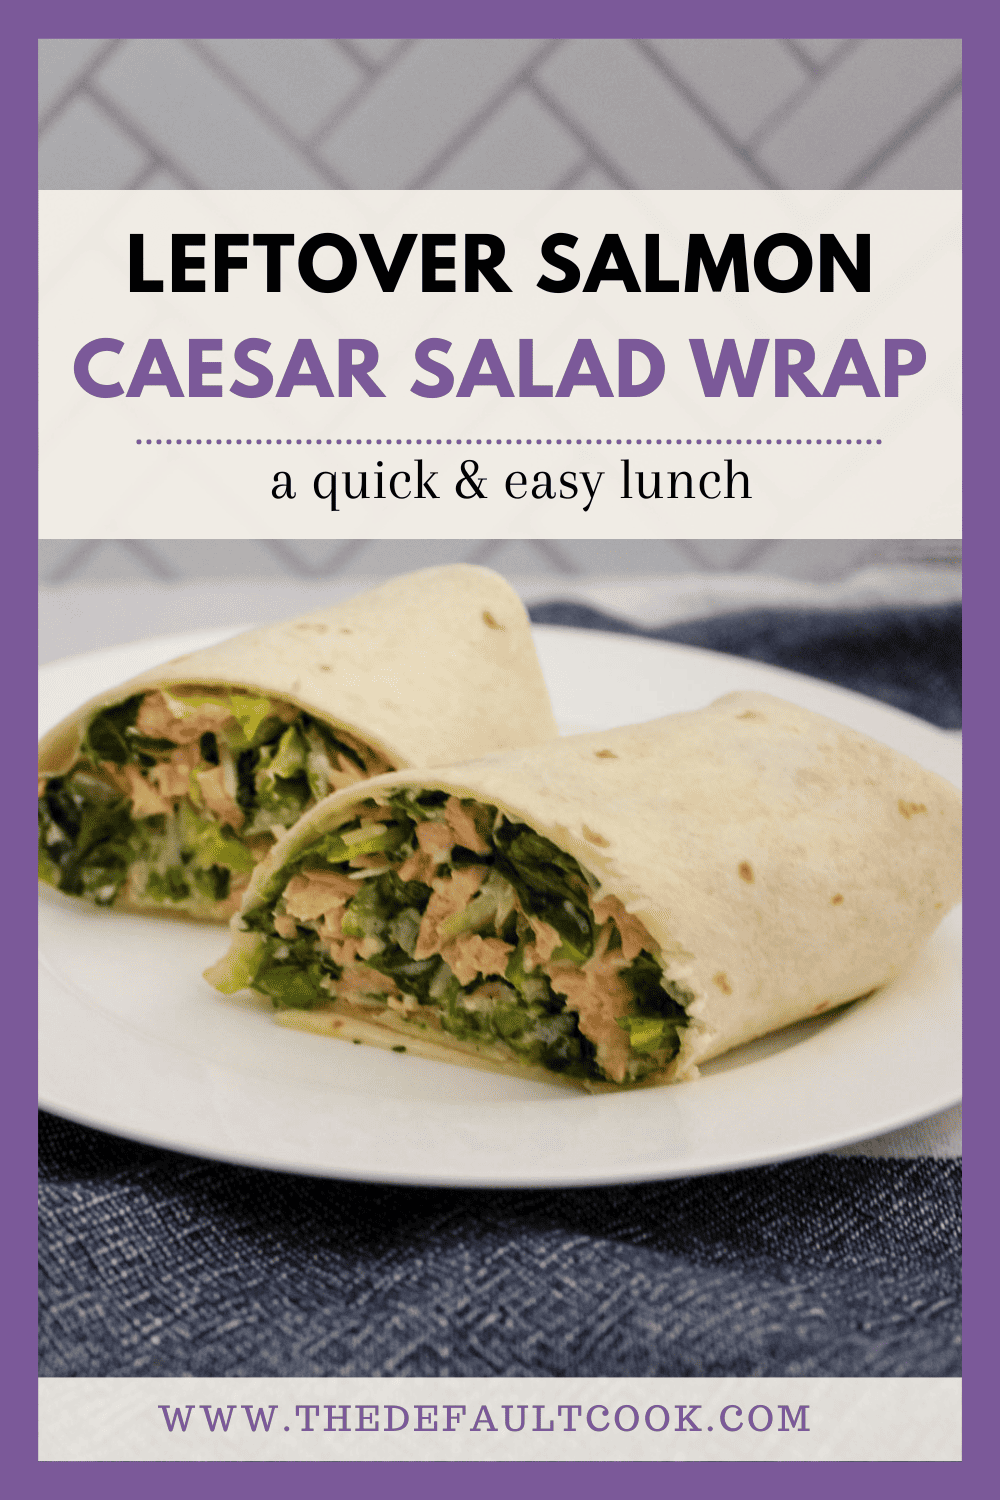 A caesar salad wrap with salmon cut in half and the open end of both haves facing the viewer.